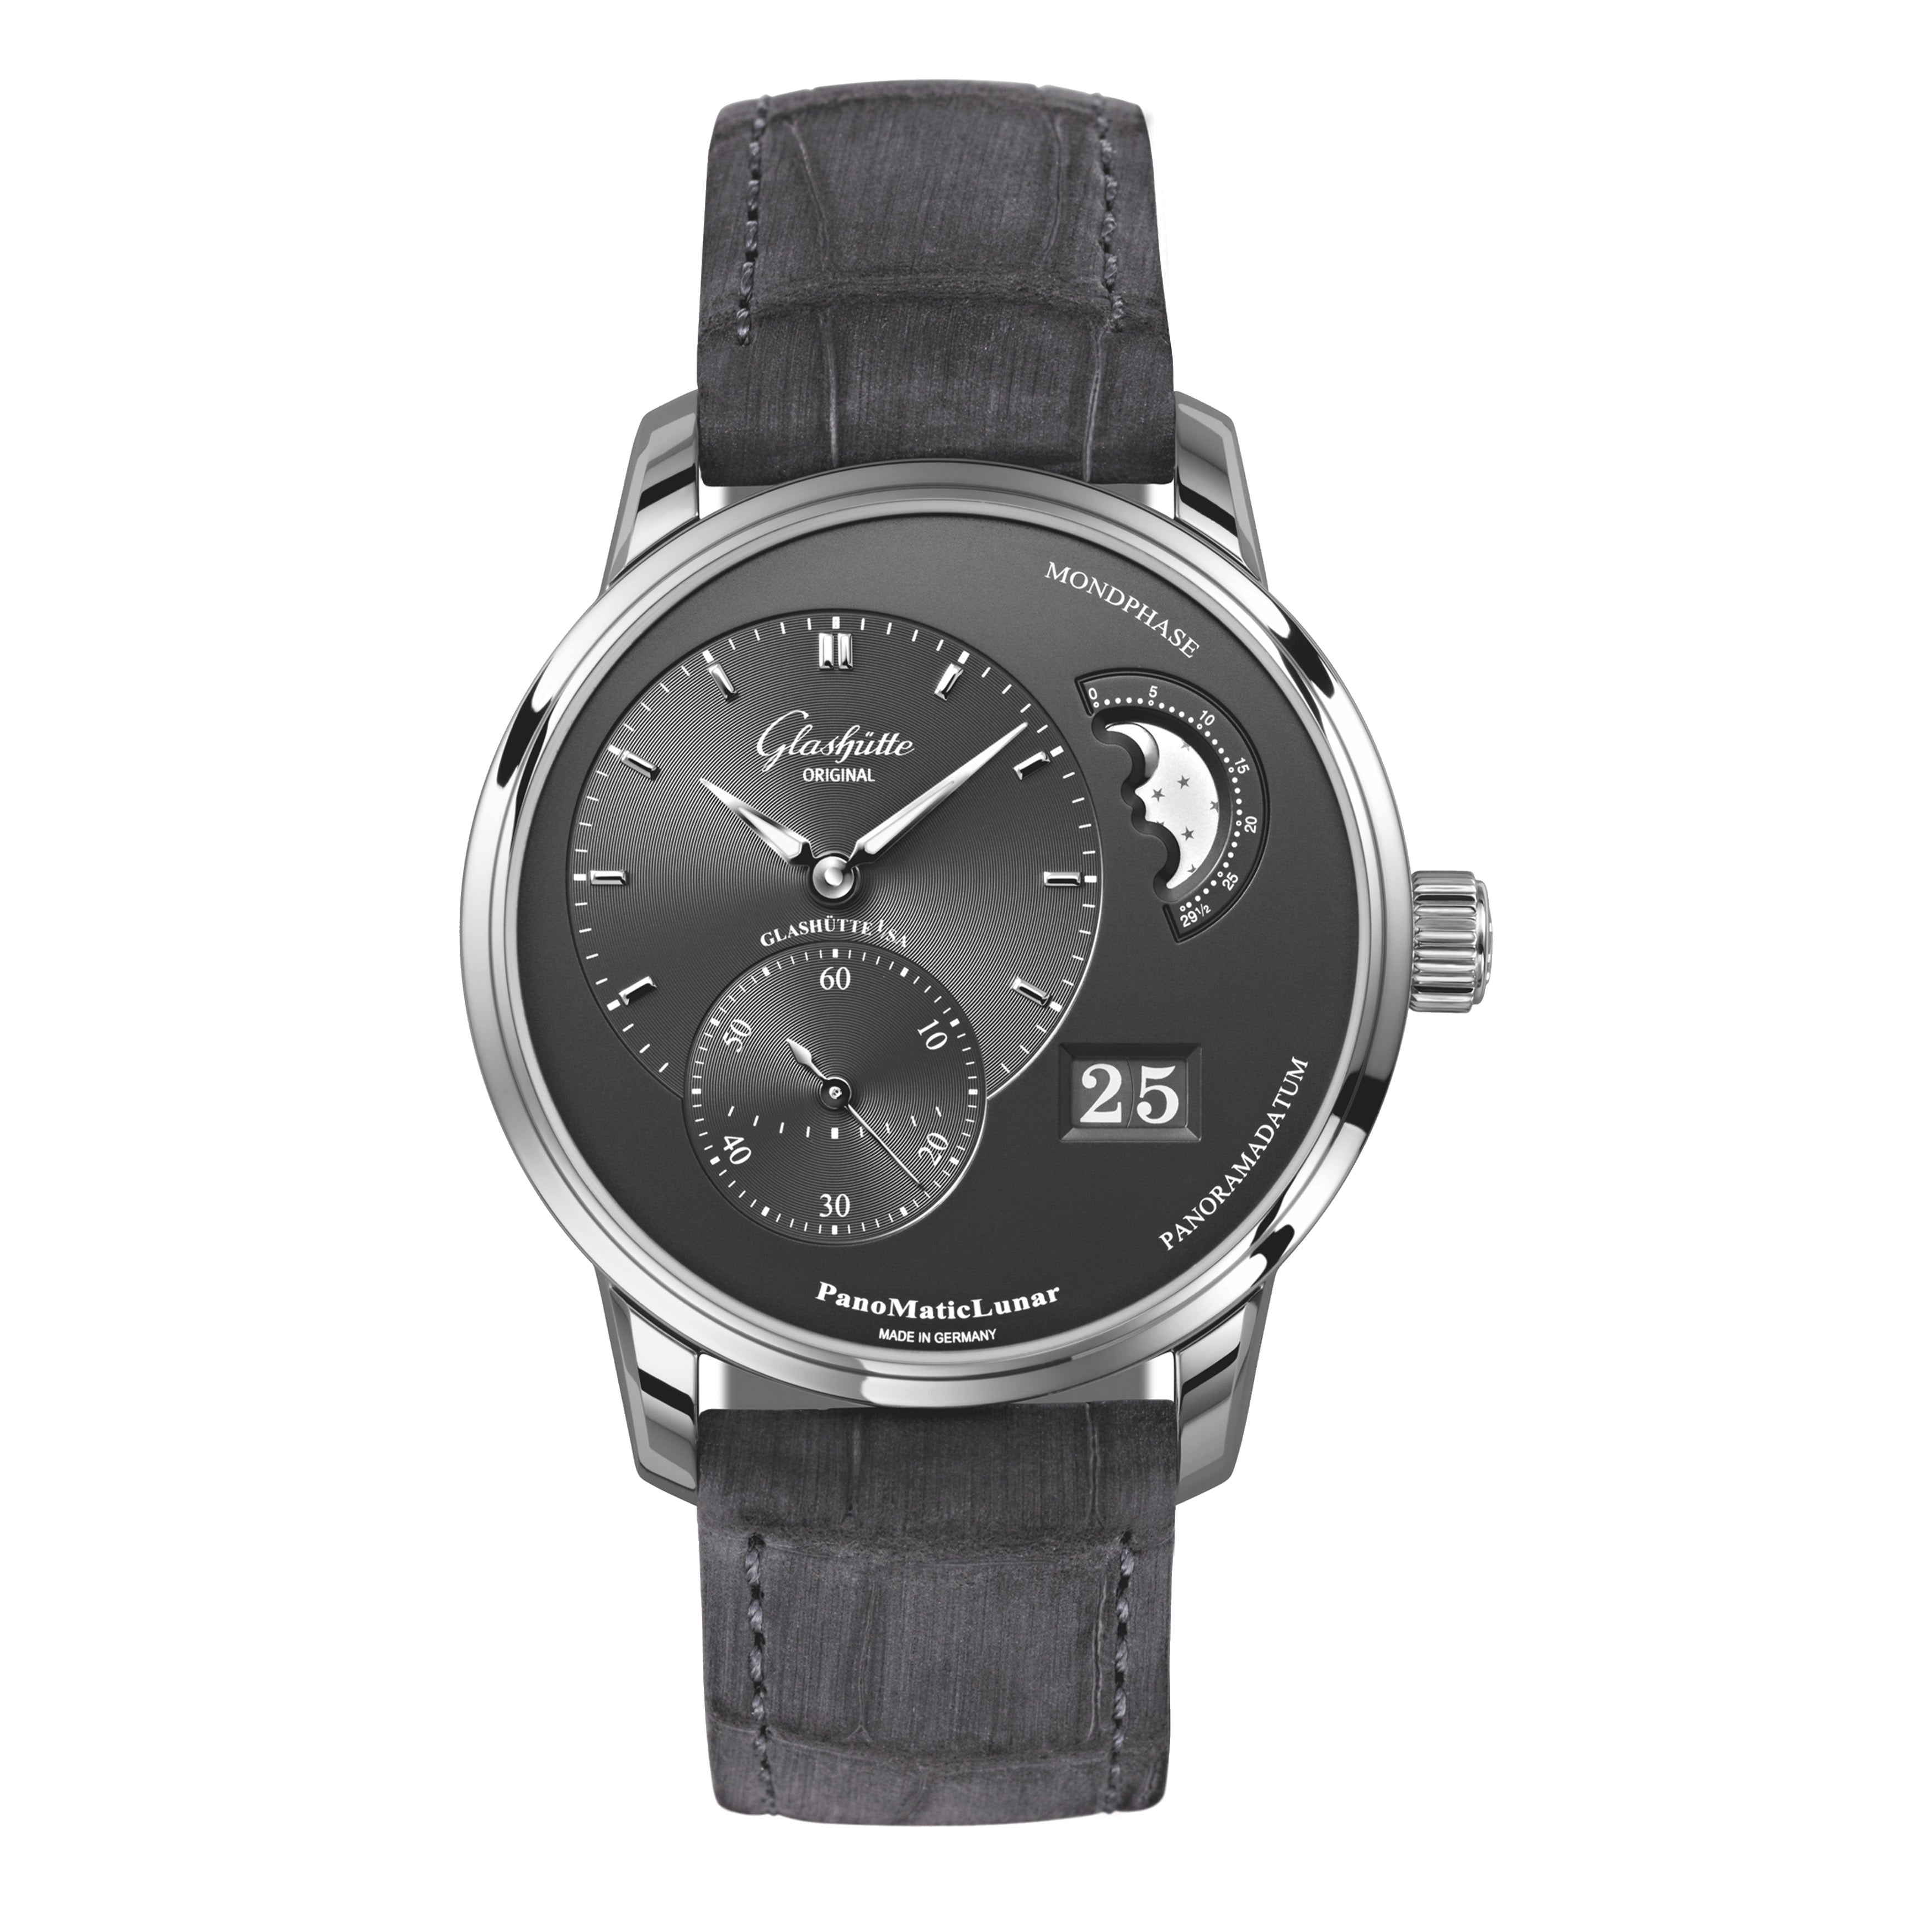 Glashutte Original Sixties Small Second Watch, 42mm Silver Dial, 1-39